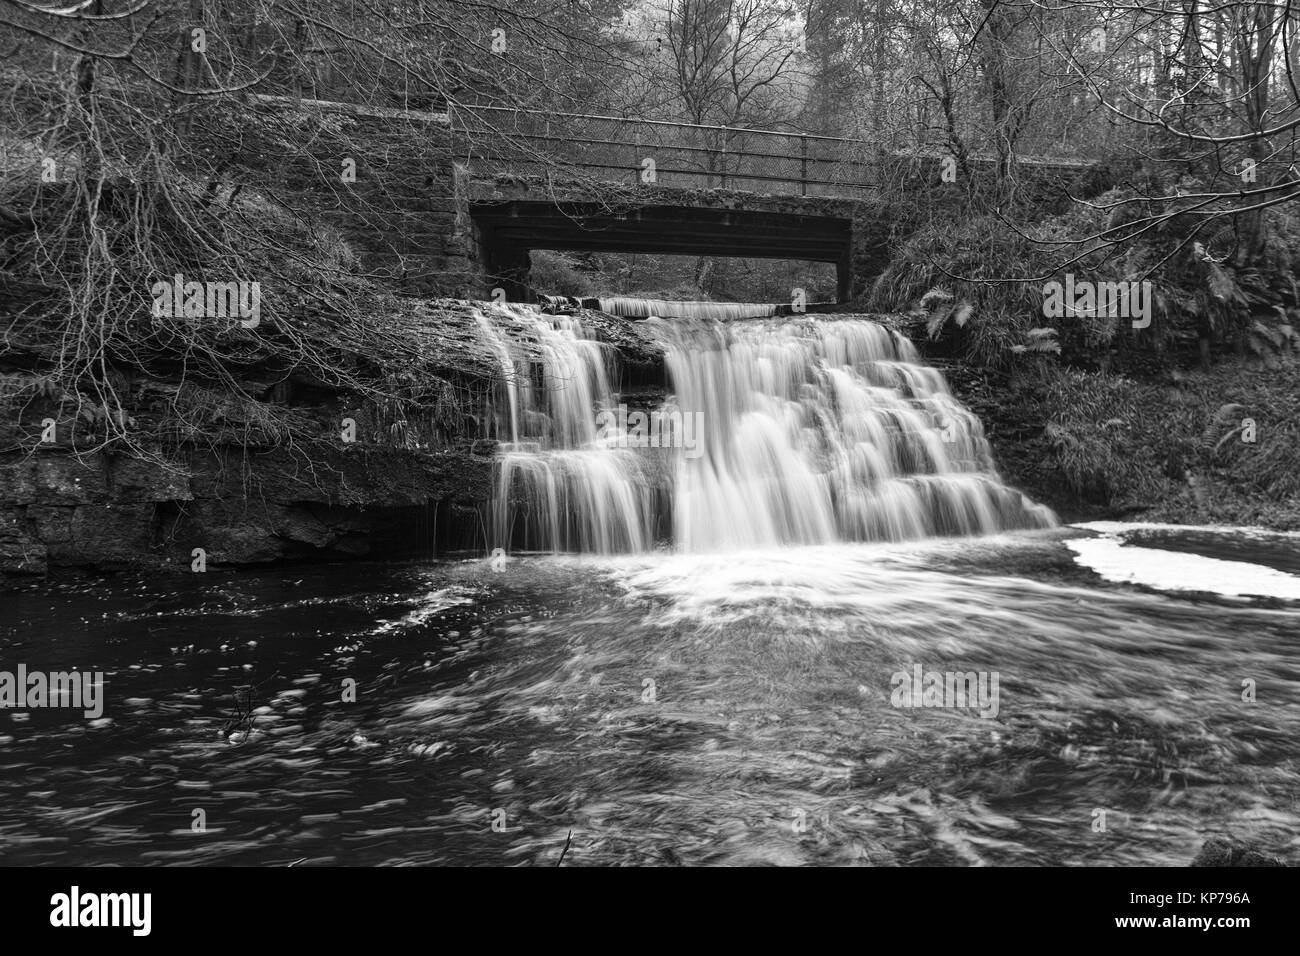 Blackling Hole Waterfall in full flow in Hamsterley forest in County Durham, North East England. Stock Photo